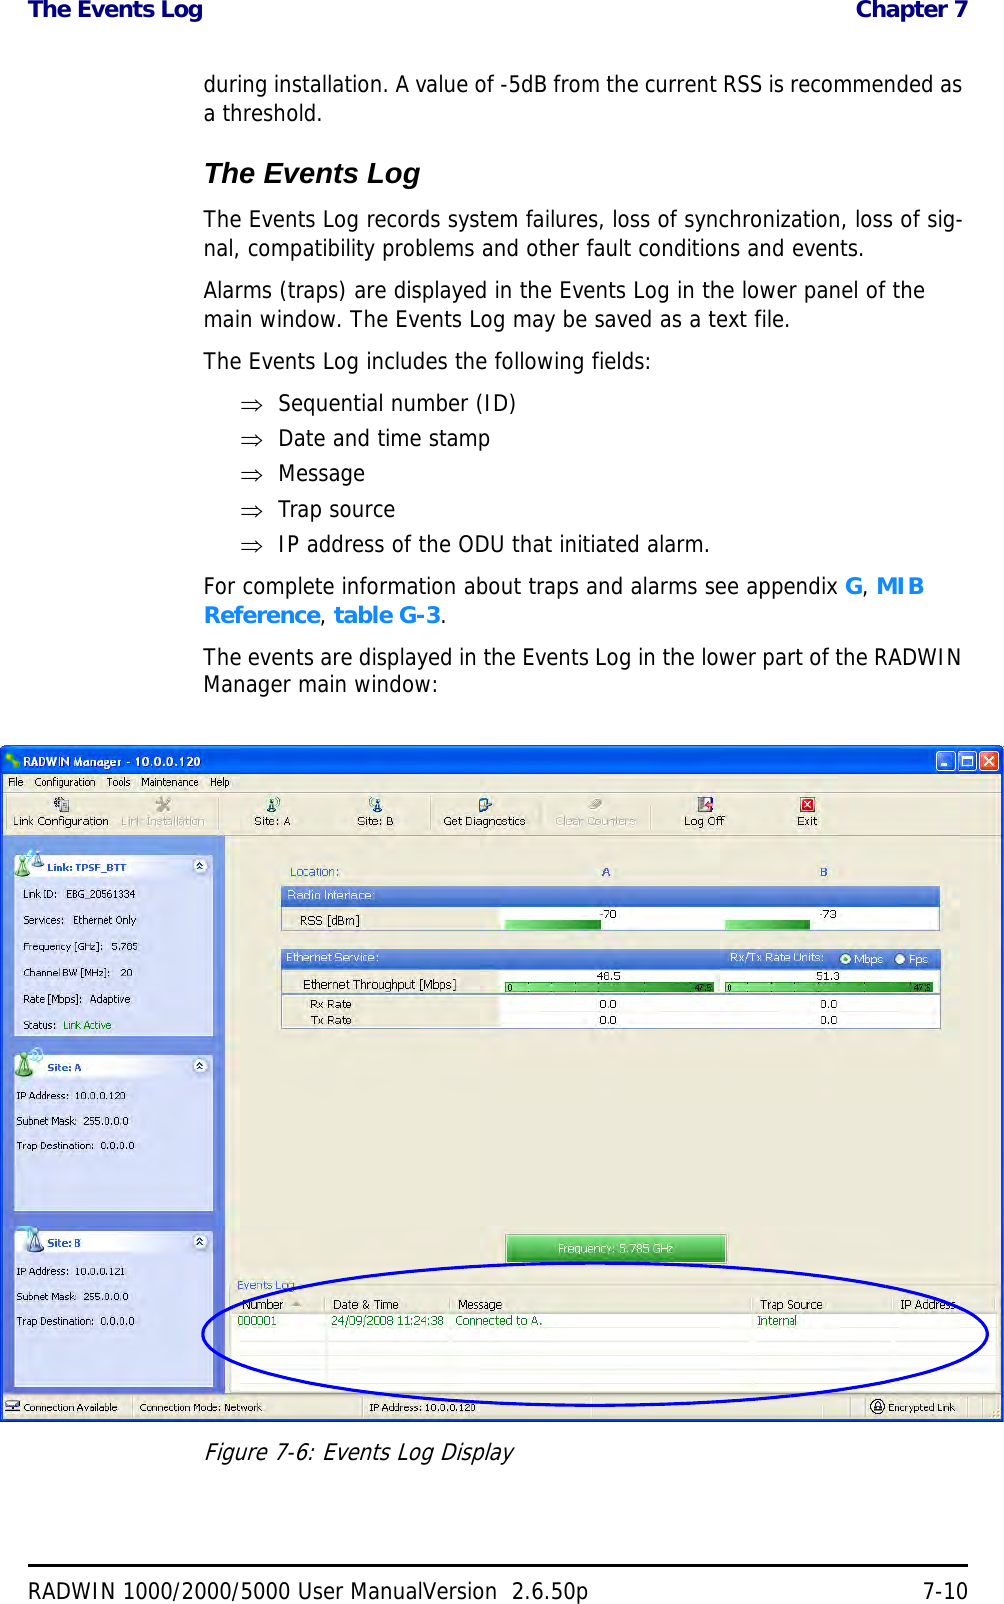 The Events Log  Chapter 7RADWIN 1000/2000/5000 User ManualVersion  2.6.50p 7-10during installation. A value of -5dB from the current RSS is recommended as a threshold.The Events LogThe Events Log records system failures, loss of synchronization, loss of sig-nal, compatibility problems and other fault conditions and events.Alarms (traps) are displayed in the Events Log in the lower panel of the main window. The Events Log may be saved as a text file.The Events Log includes the following fields:Sequential number (ID)Date and time stampMessageTrap sourceIP address of the ODU that initiated alarm.For complete information about traps and alarms see appendix G, MIB Reference, table G-3.The events are displayed in the Events Log in the lower part of the RADWIN Manager main window:Figure 7-6: Events Log Display